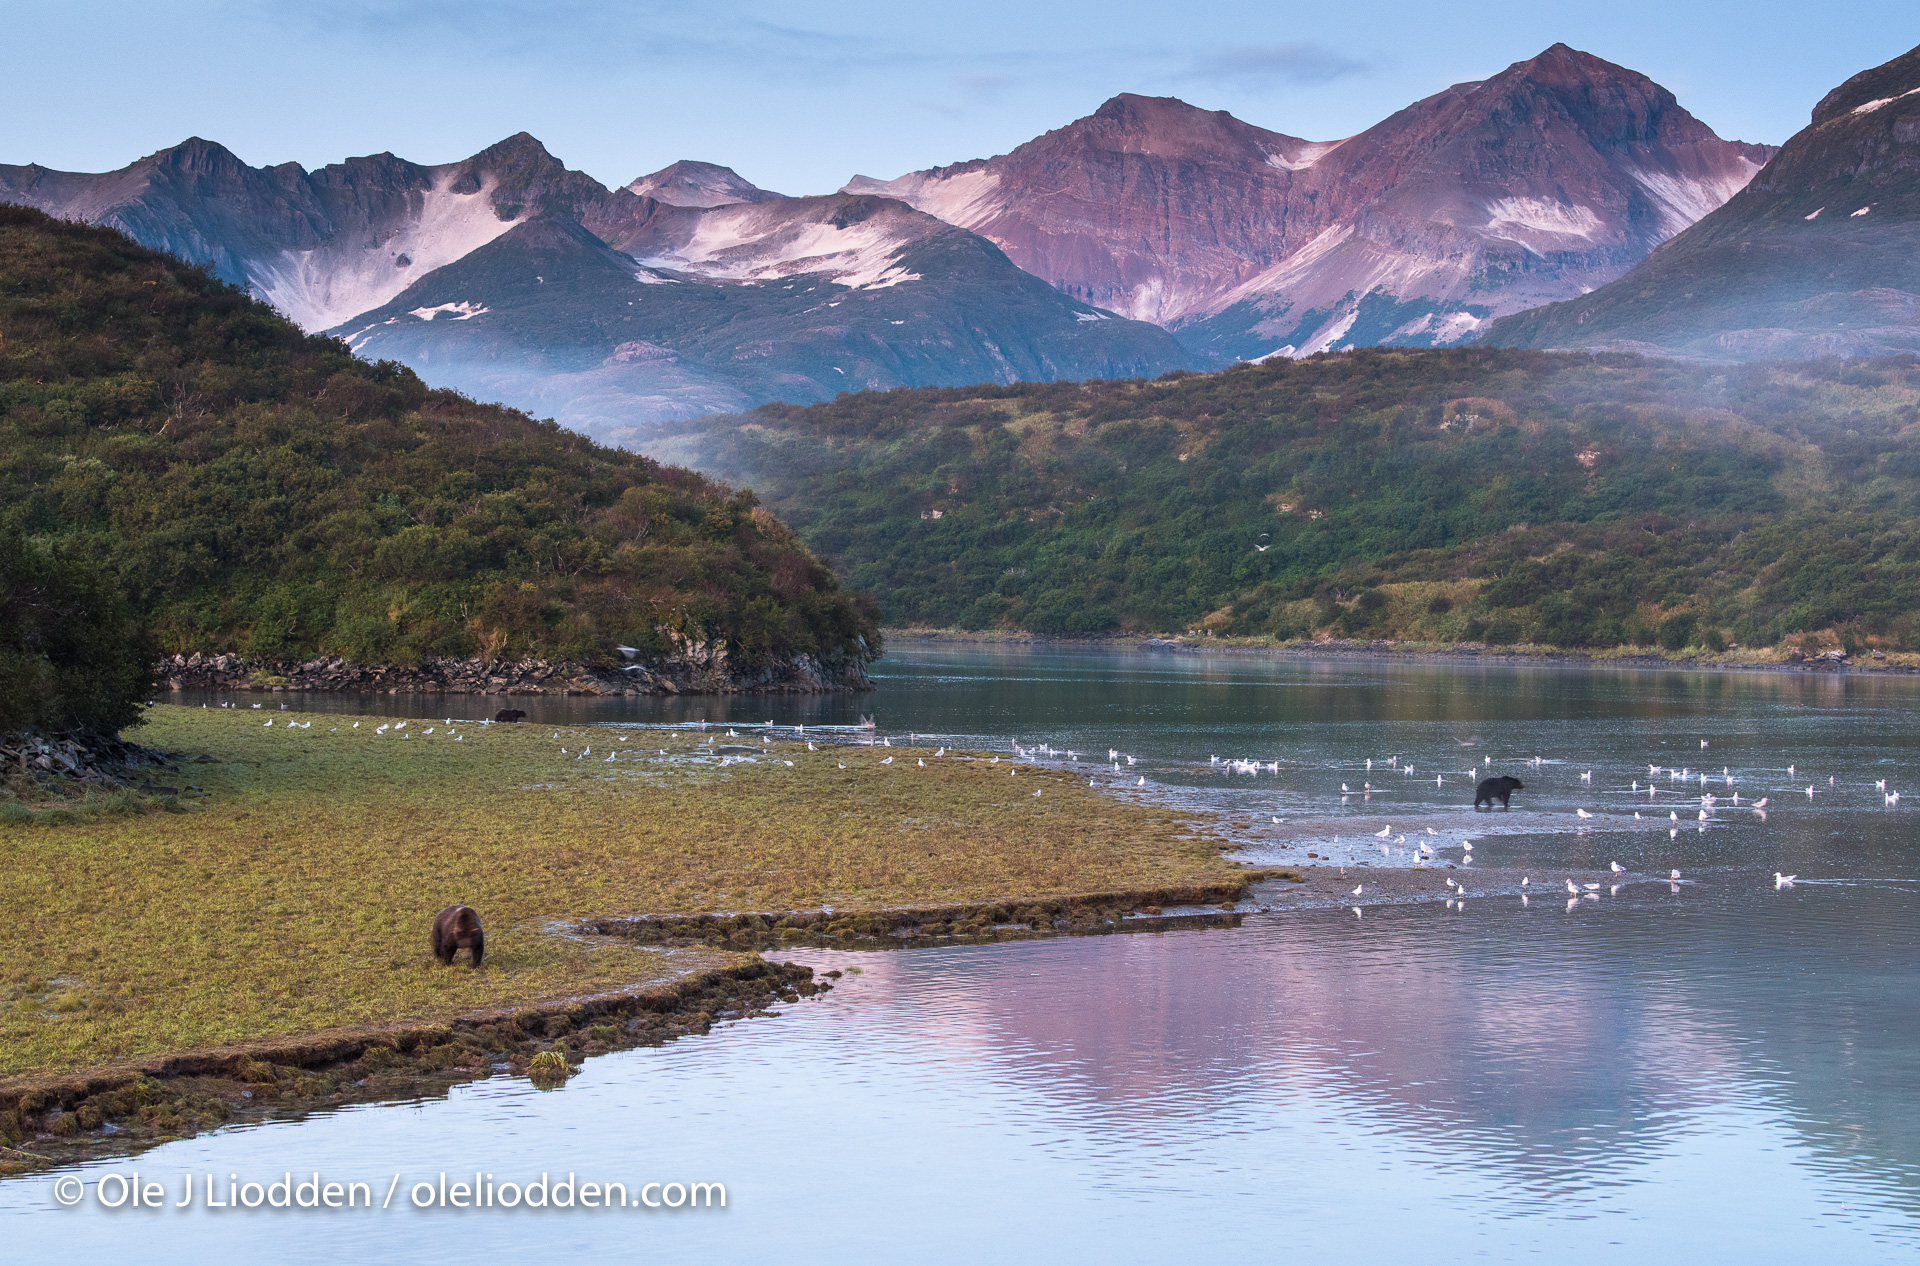 Alaskan landscapes are legendary and Katmai is no exception